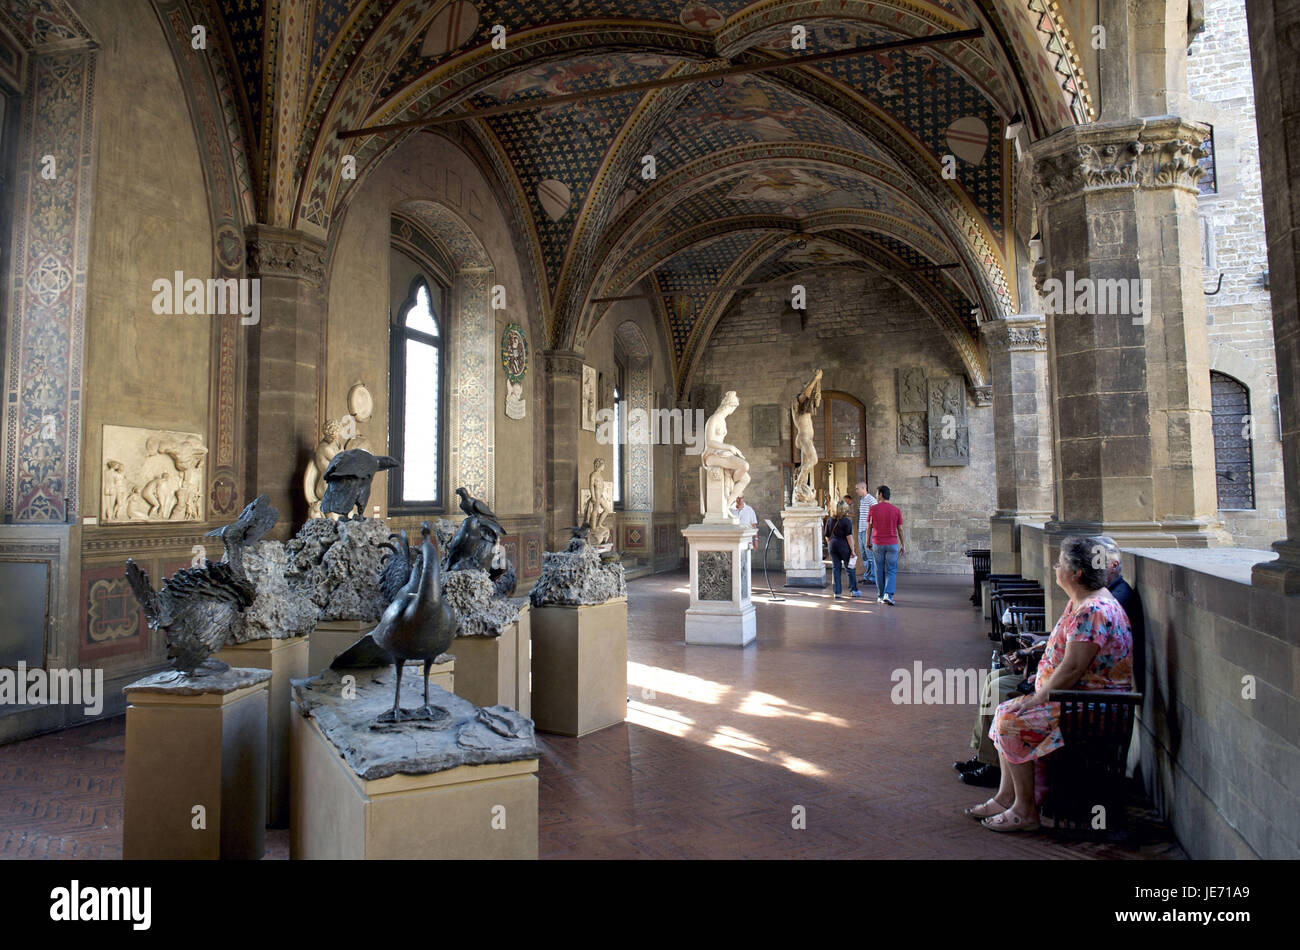 Italy, Tuscany, Florence, Bargello national museum, colonnade, tourist, Stock Photo